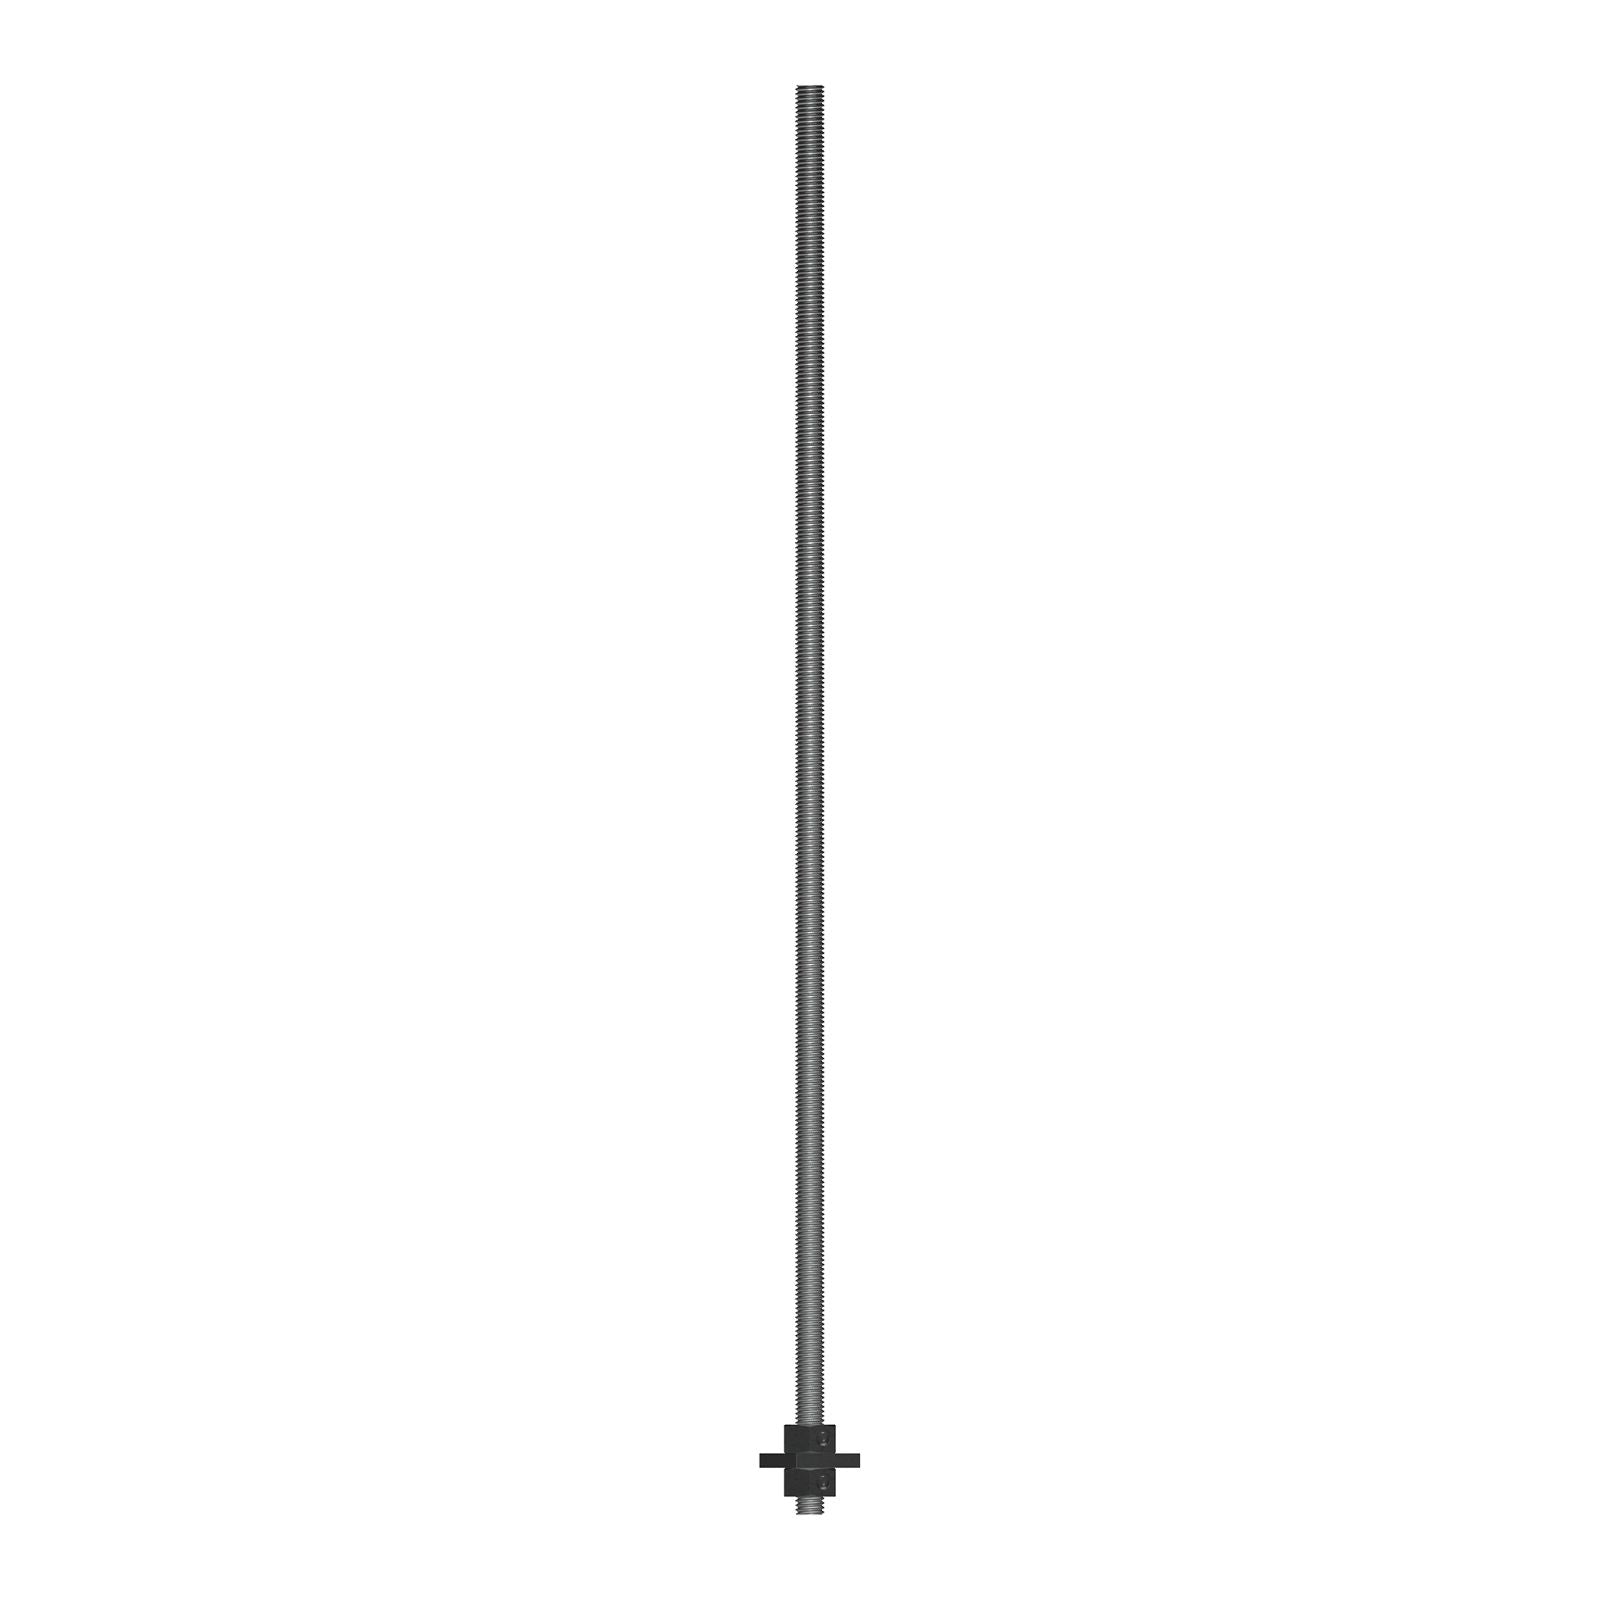 34 inch x 30 inch HighStrength Steel PreAssembled Anchor Bolt